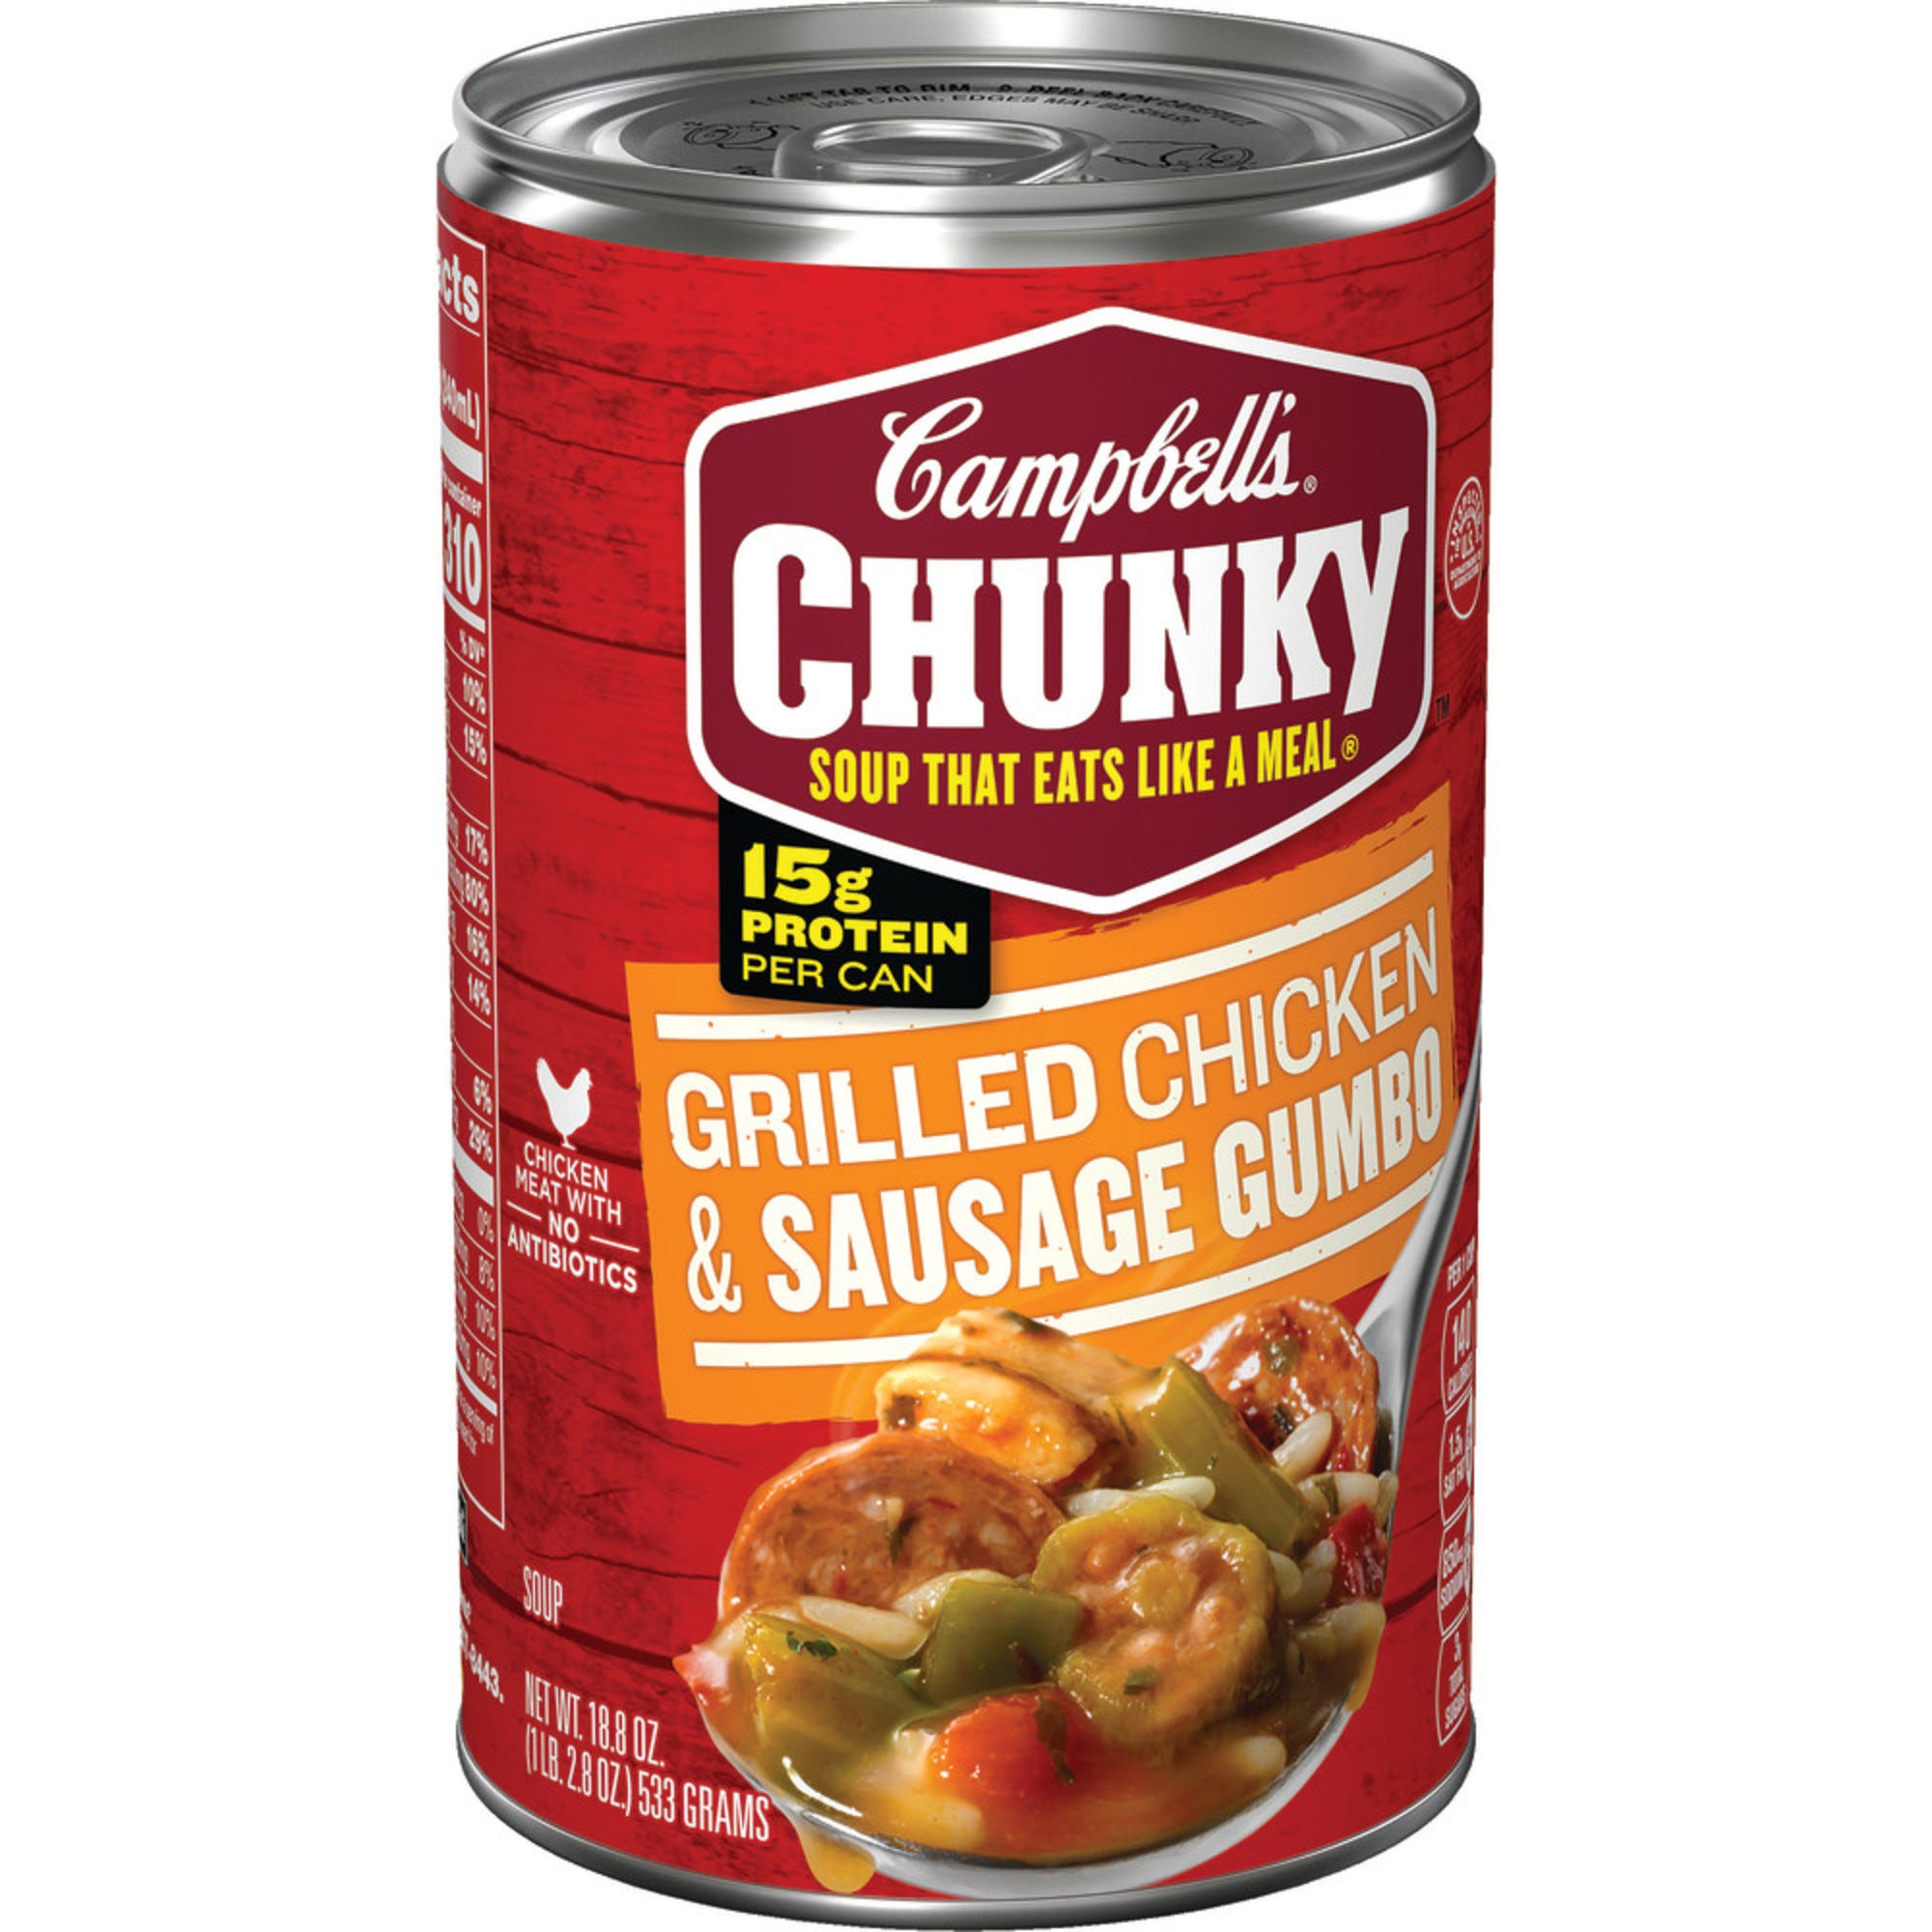 Campbell's Chunky Soup, Grilled Chicken & Sausage Gumbo - 18.8 oz